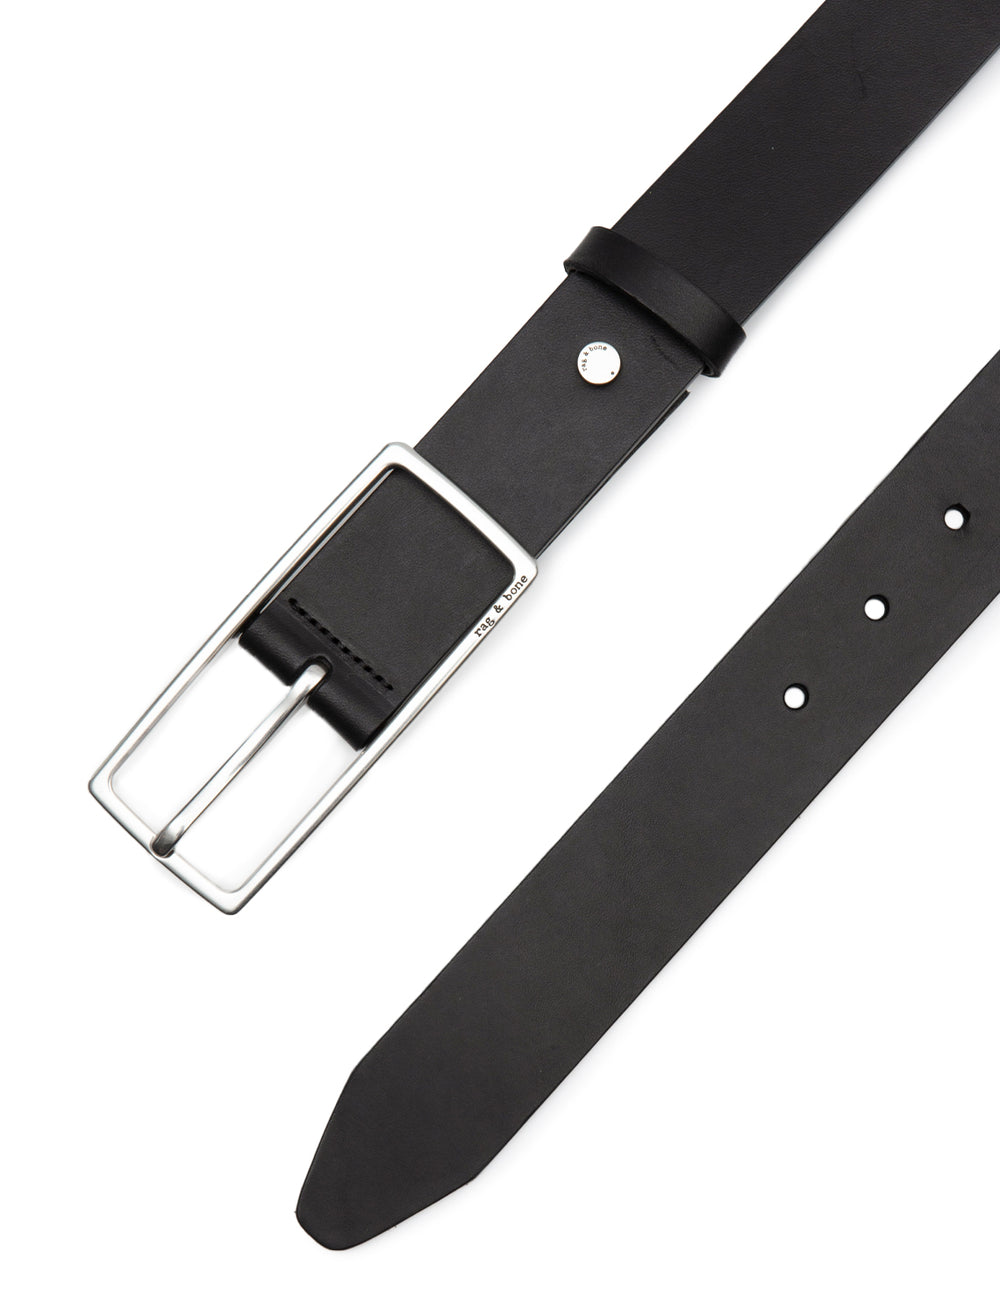 Close-up view of Rag & Bone's rebound belt in black and silver.